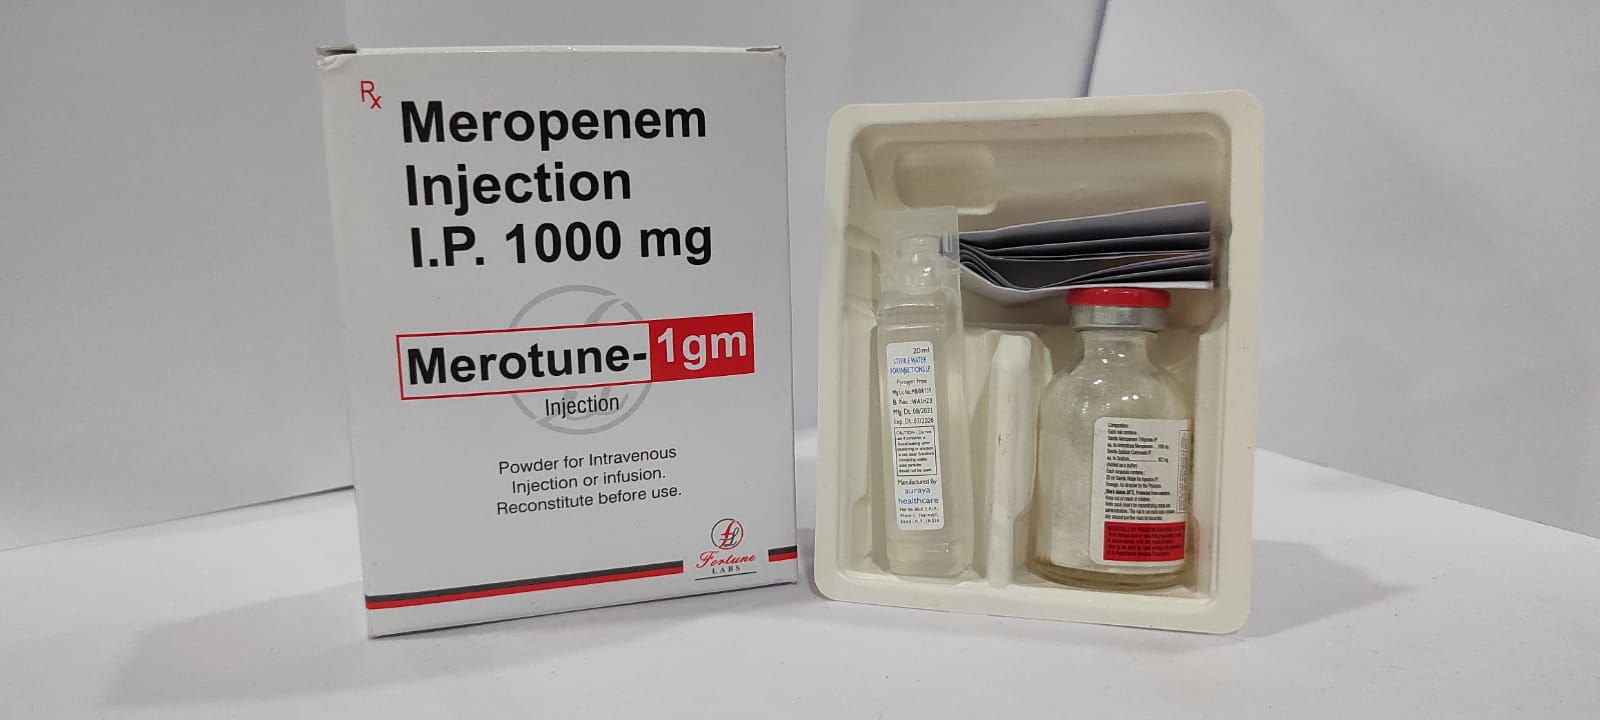 meropenem 1gm with tray pack